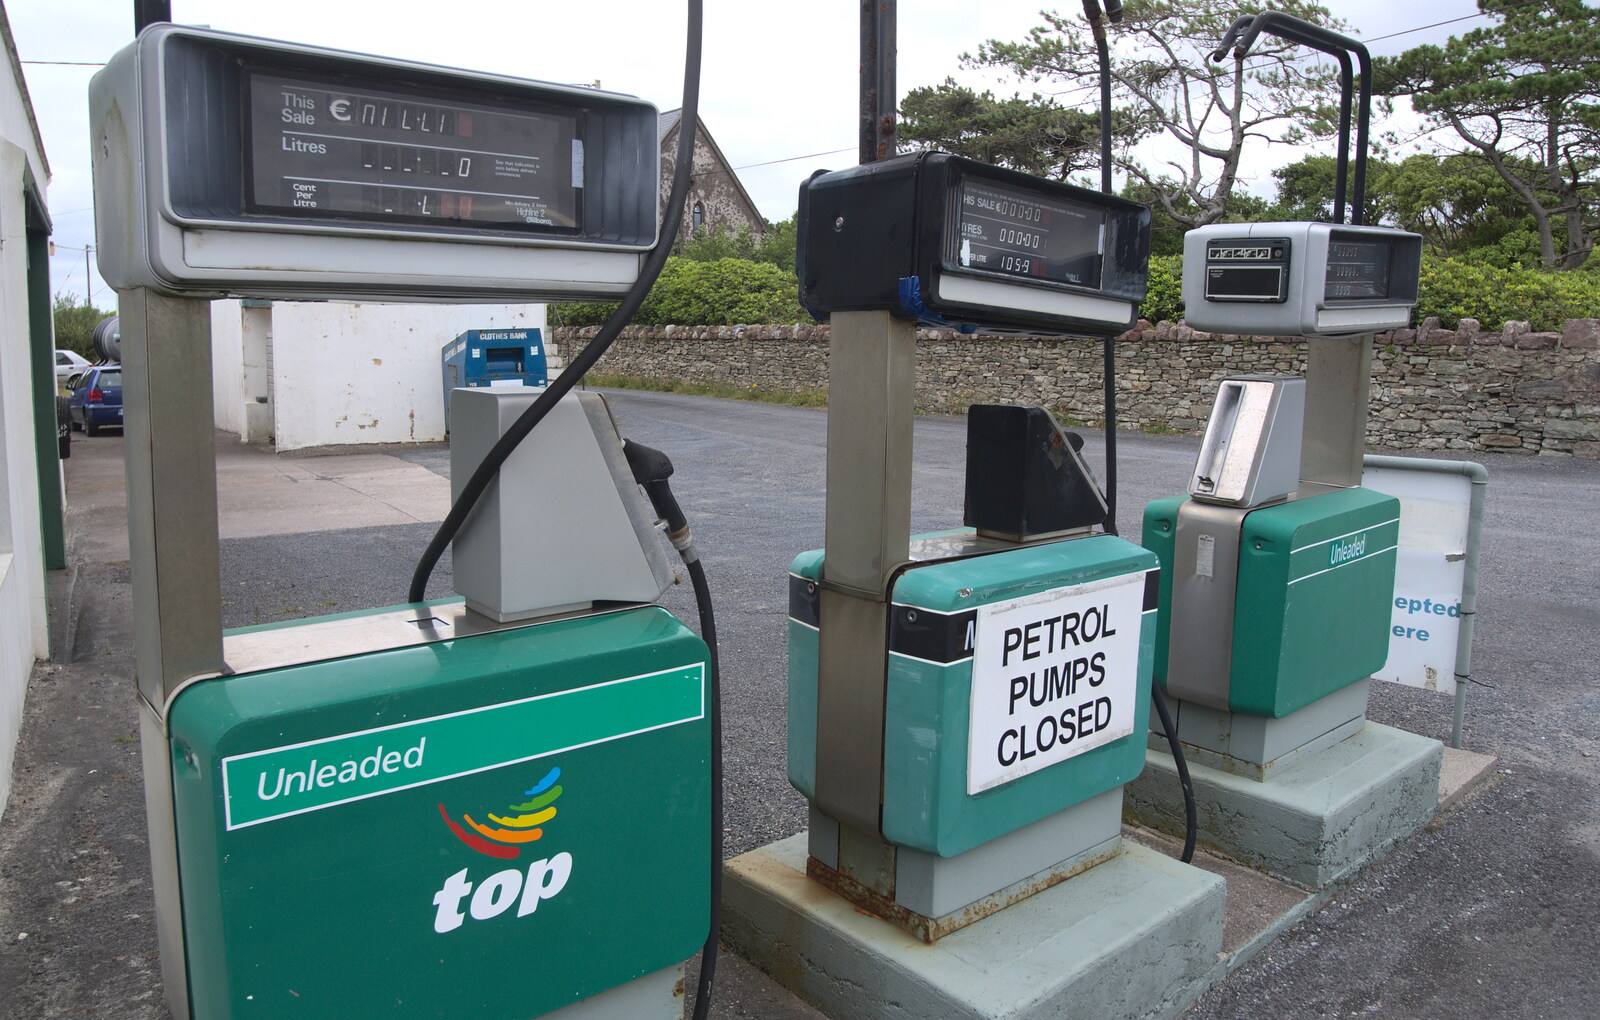 Closed petrol pumps from From Achill to Strokestown, Mayo and Roscommon, Ireland - 10th August 2017